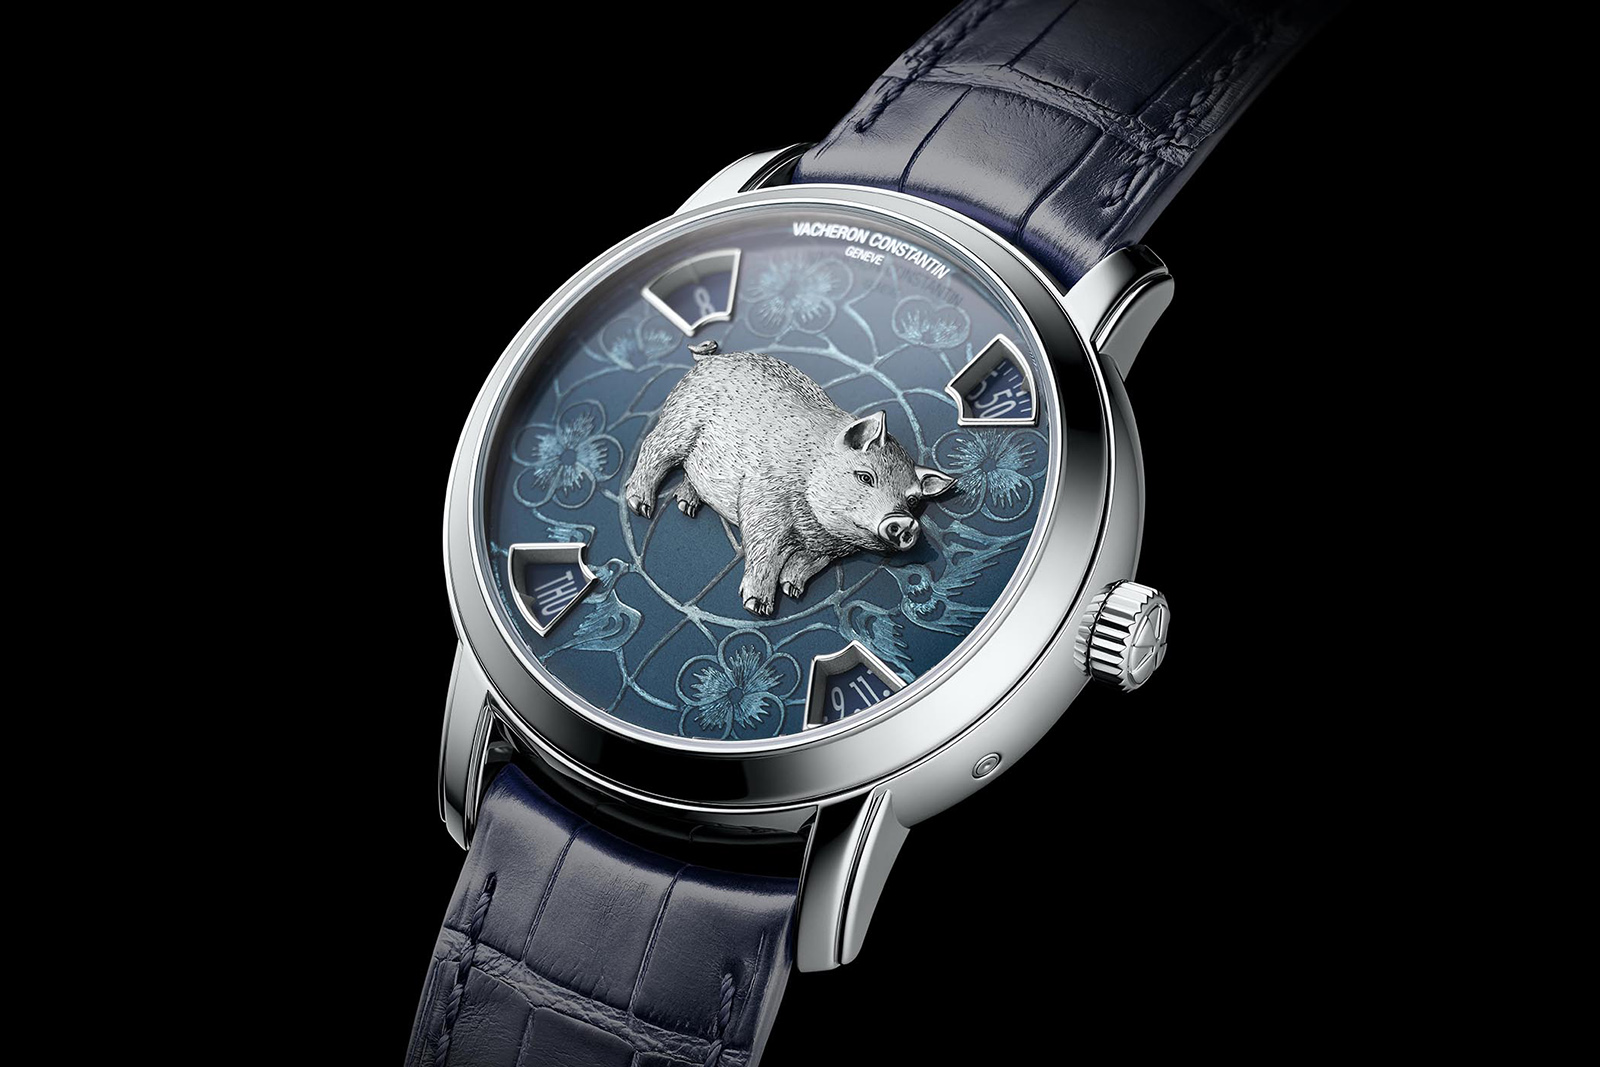 Vacheron Constantin ‘Legend of the Chinese Zodiac’ watch from the ‘Métiers d’Art’ collection with Grand Feu enamel in platinum and gold  